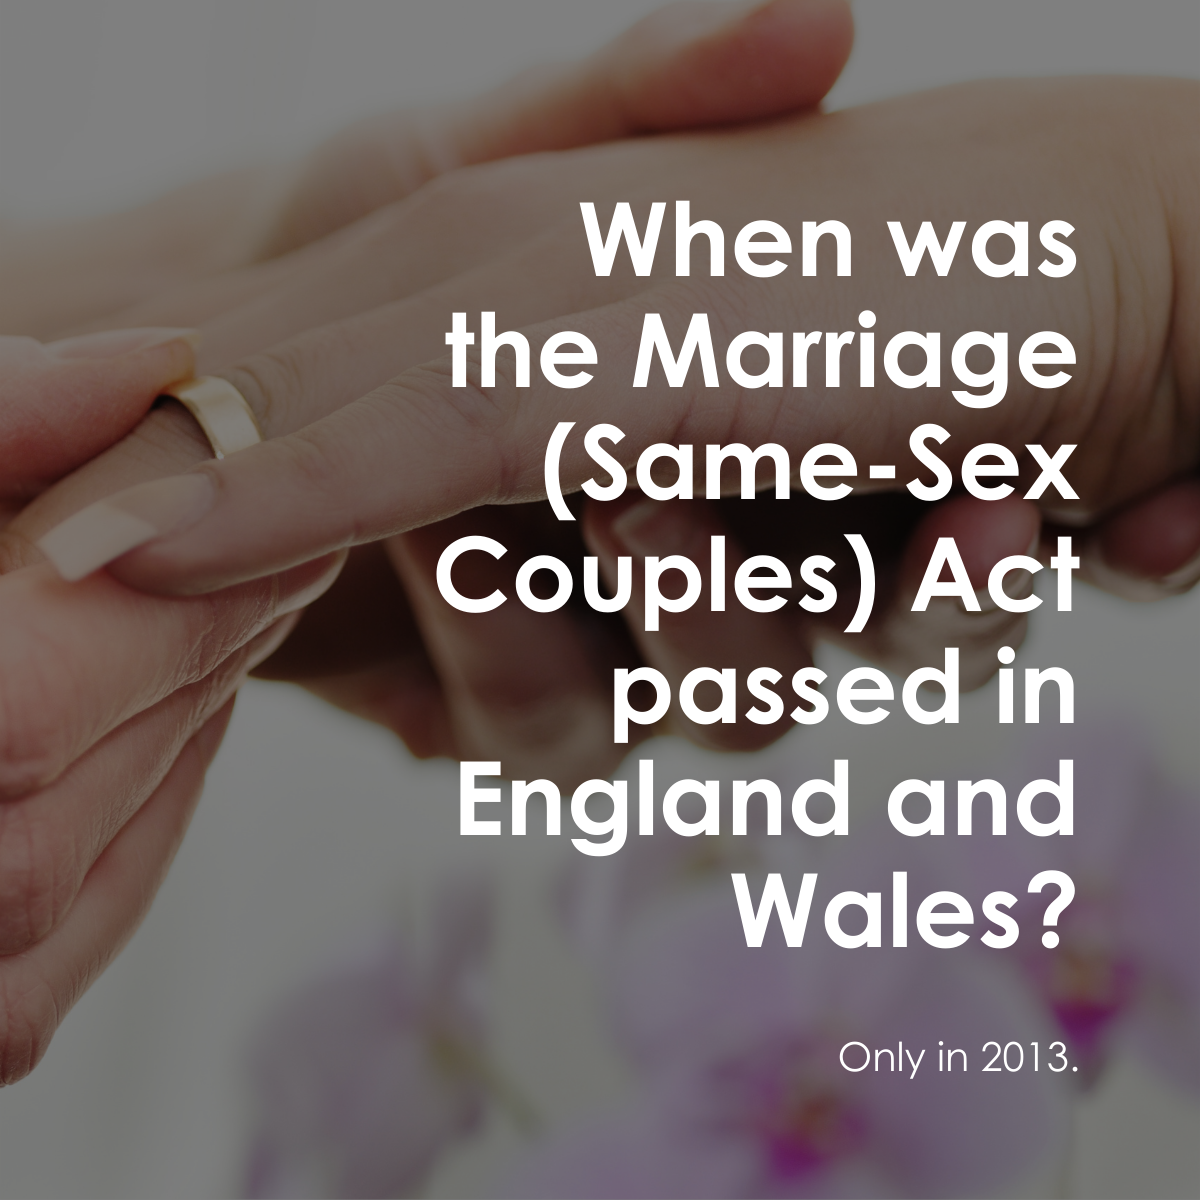 Image reading "When was the Marriage (Same-Sex Couples) Act passed in England and Wales? Only in 2013."